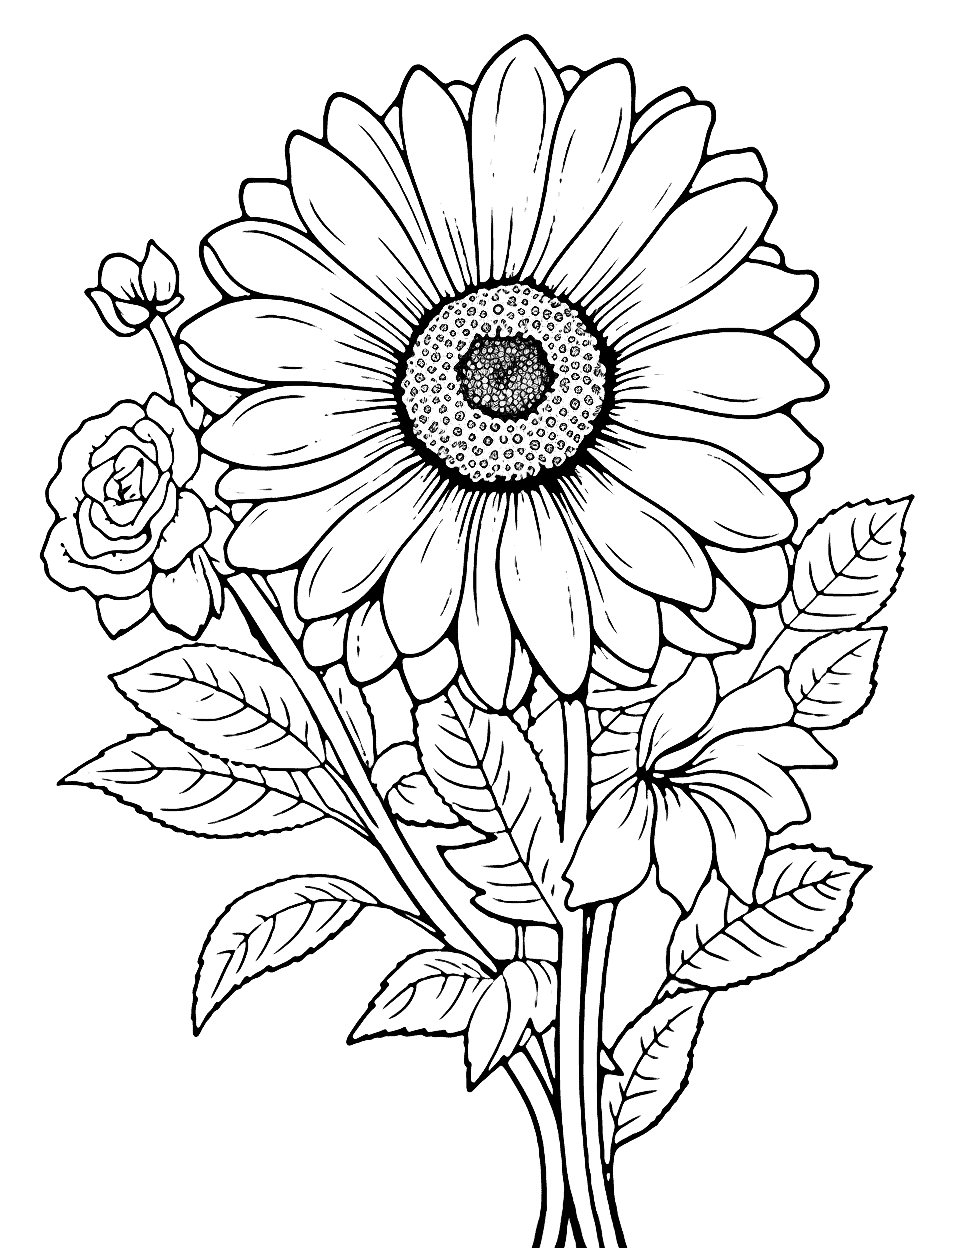 Flower Power Summer Coloring Page - Different types of summer flowers, like sunflowers, roses, and daisies, arranged in a beautiful bouquet.